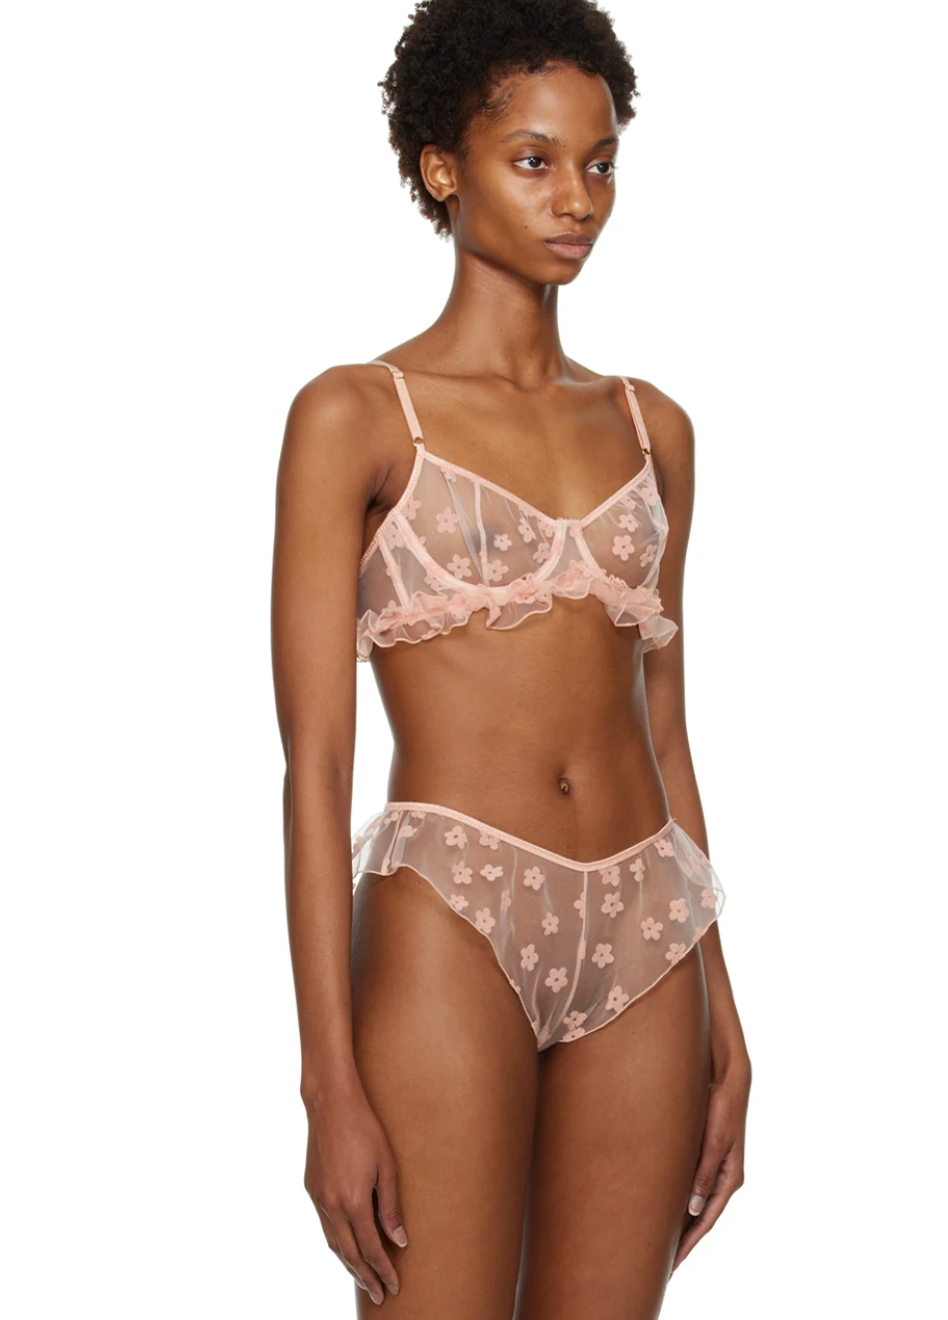 The Petite Lady - Lingerie & Bras - Sophisticated, Sexy